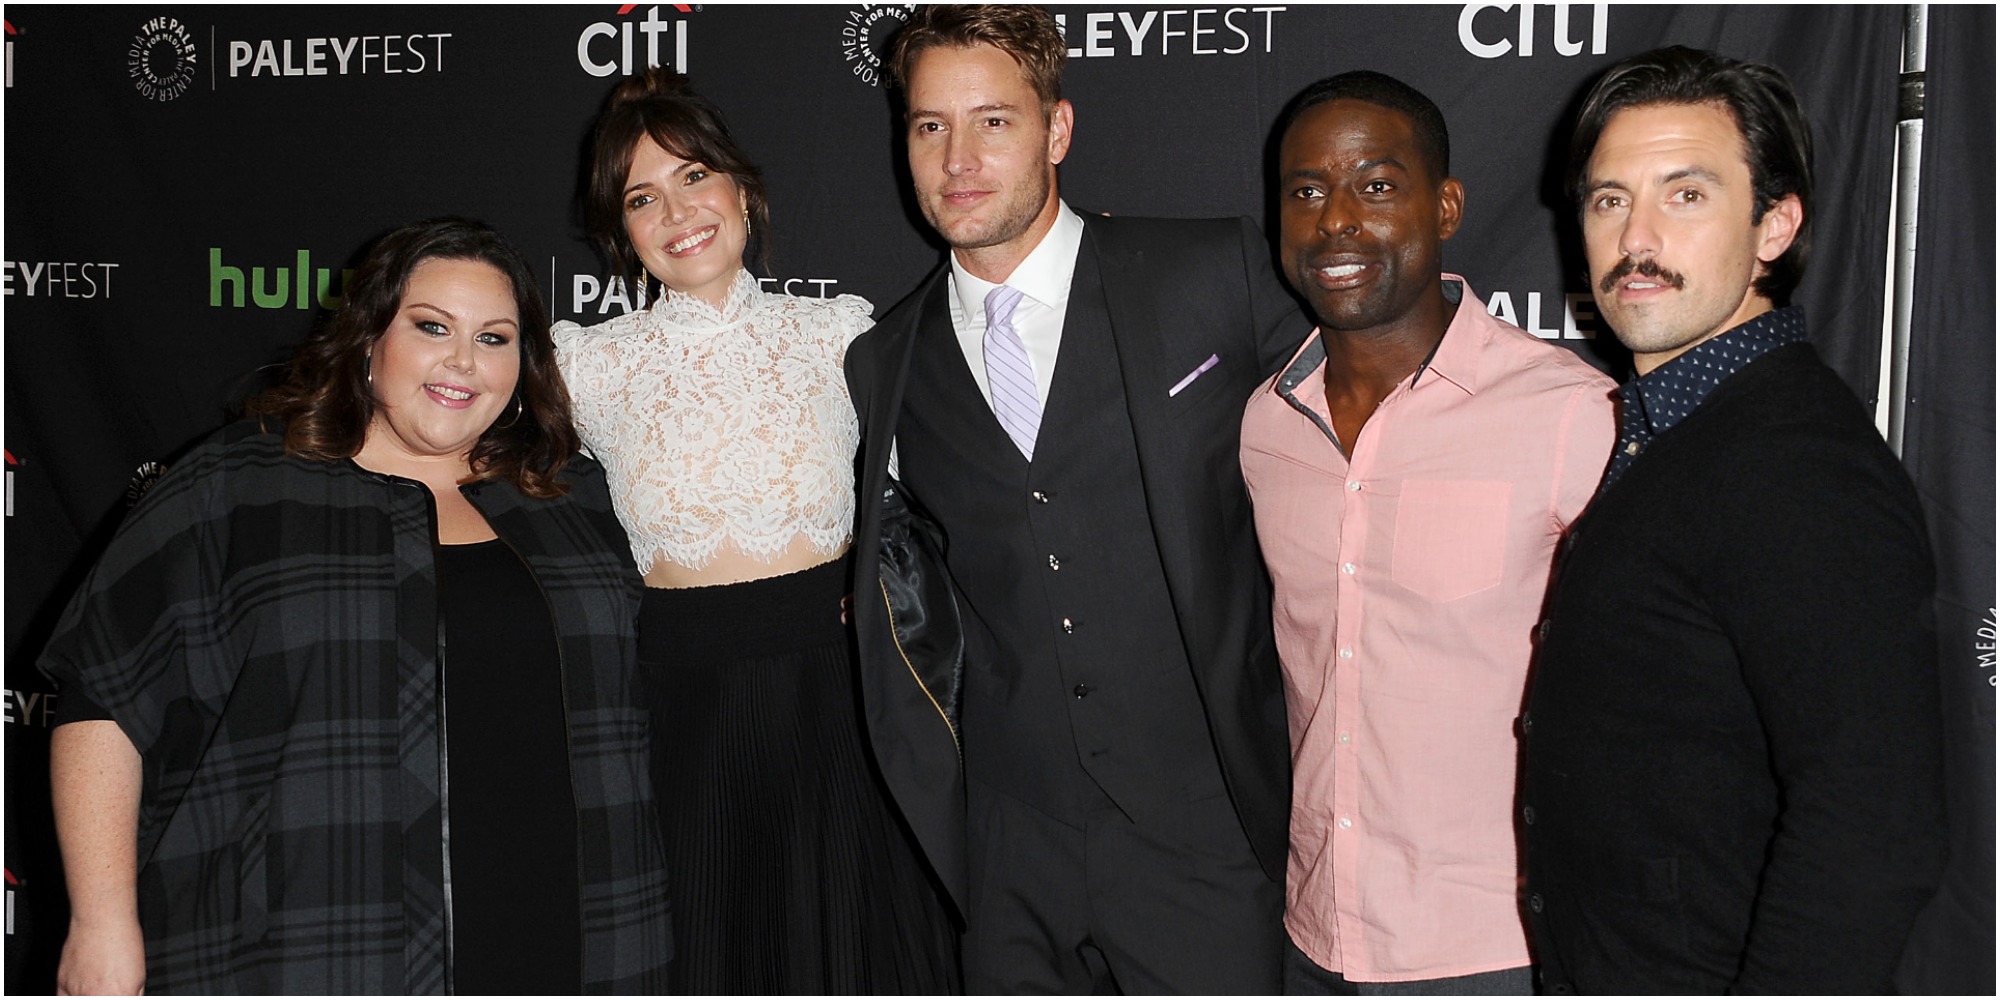 Chrissy Metz, Mandy Moore, Justin Hartley, Sterling K. Brown and Milo Ventimiglia of NBC's This Is Us.